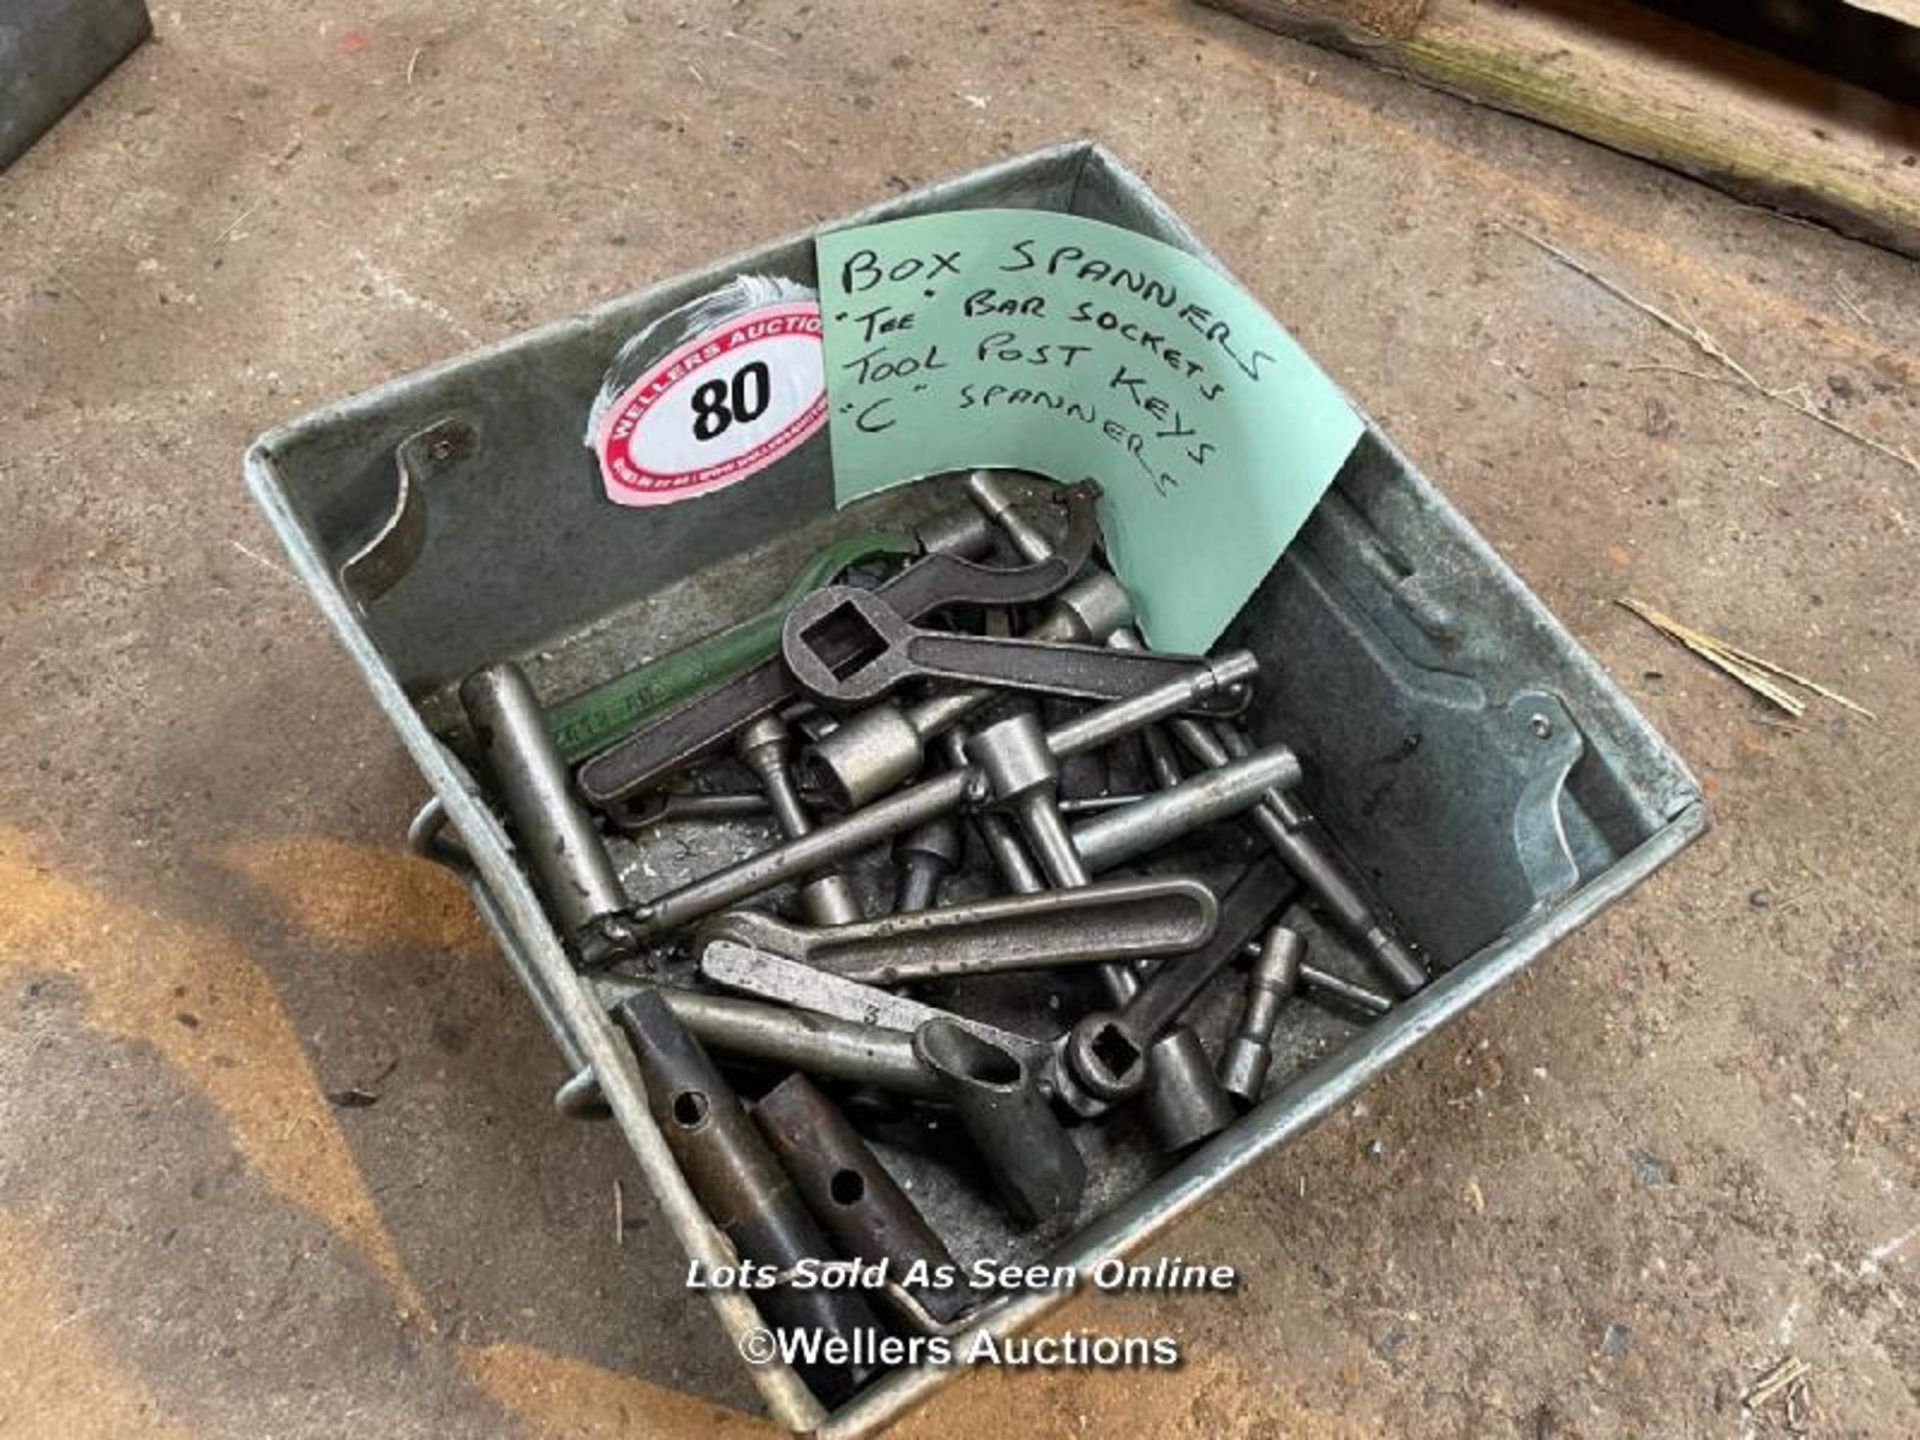 BOX OF SPANNERS, SOCKETS, KEYS AND C SPANNERS